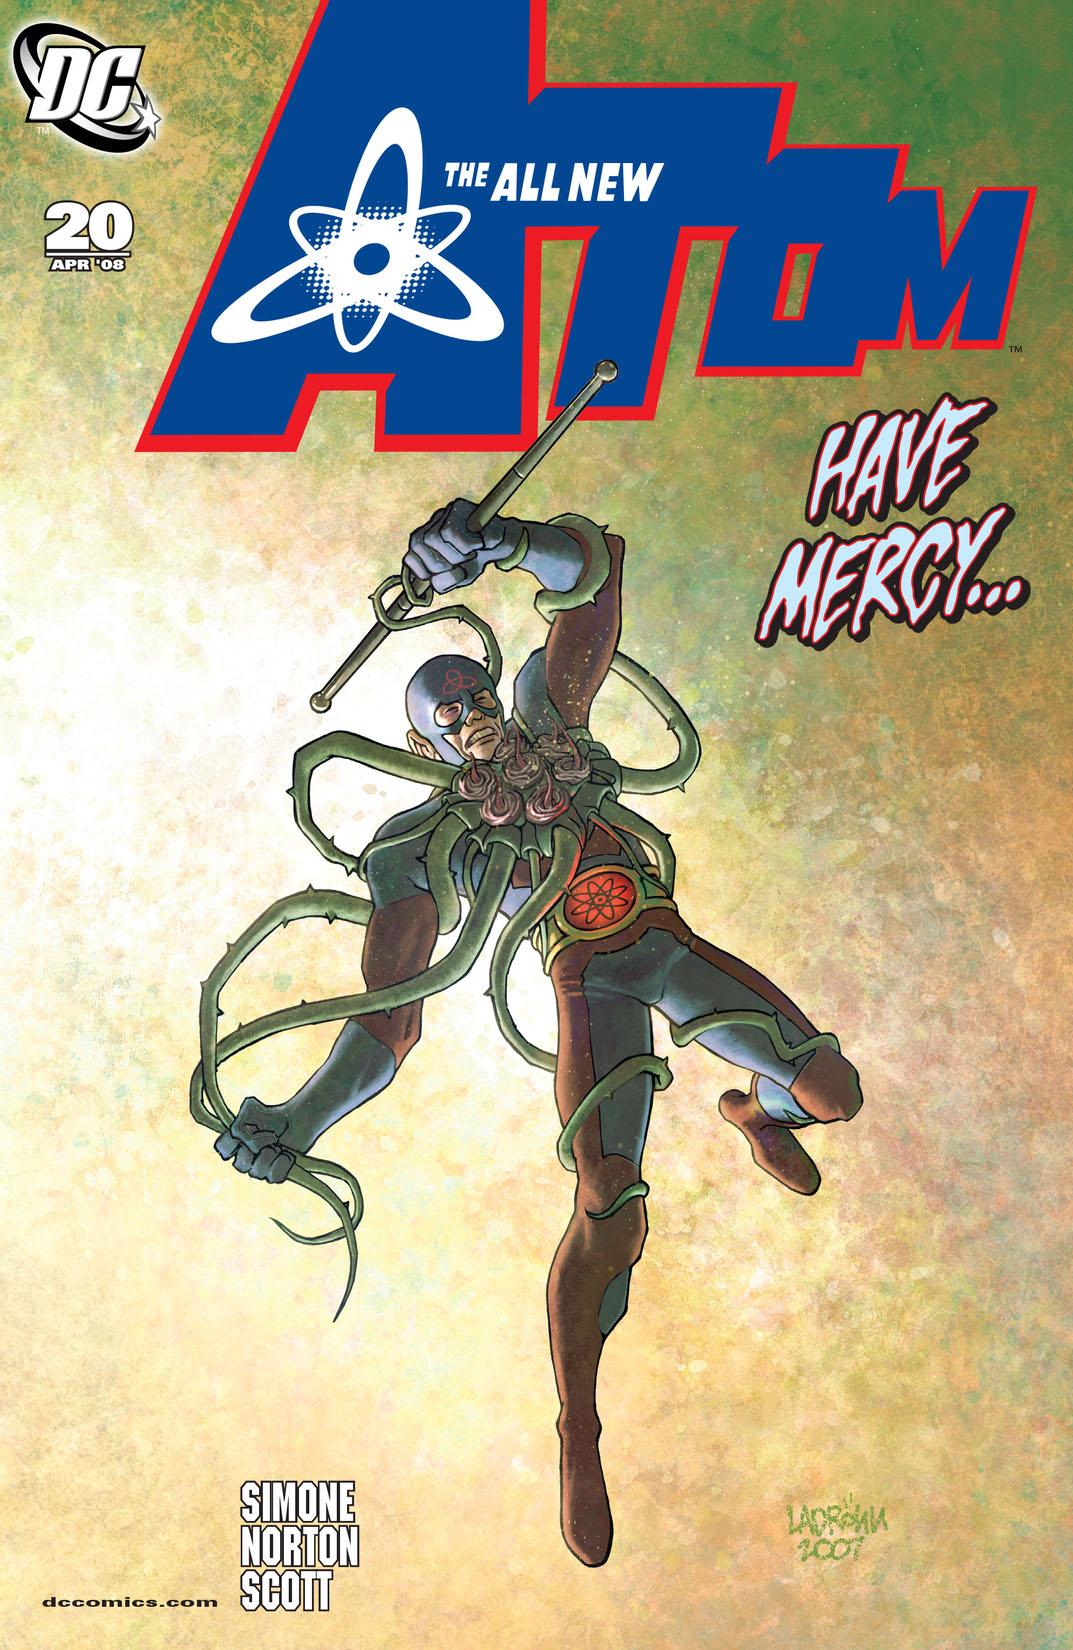 The All New Atom #20 preview images